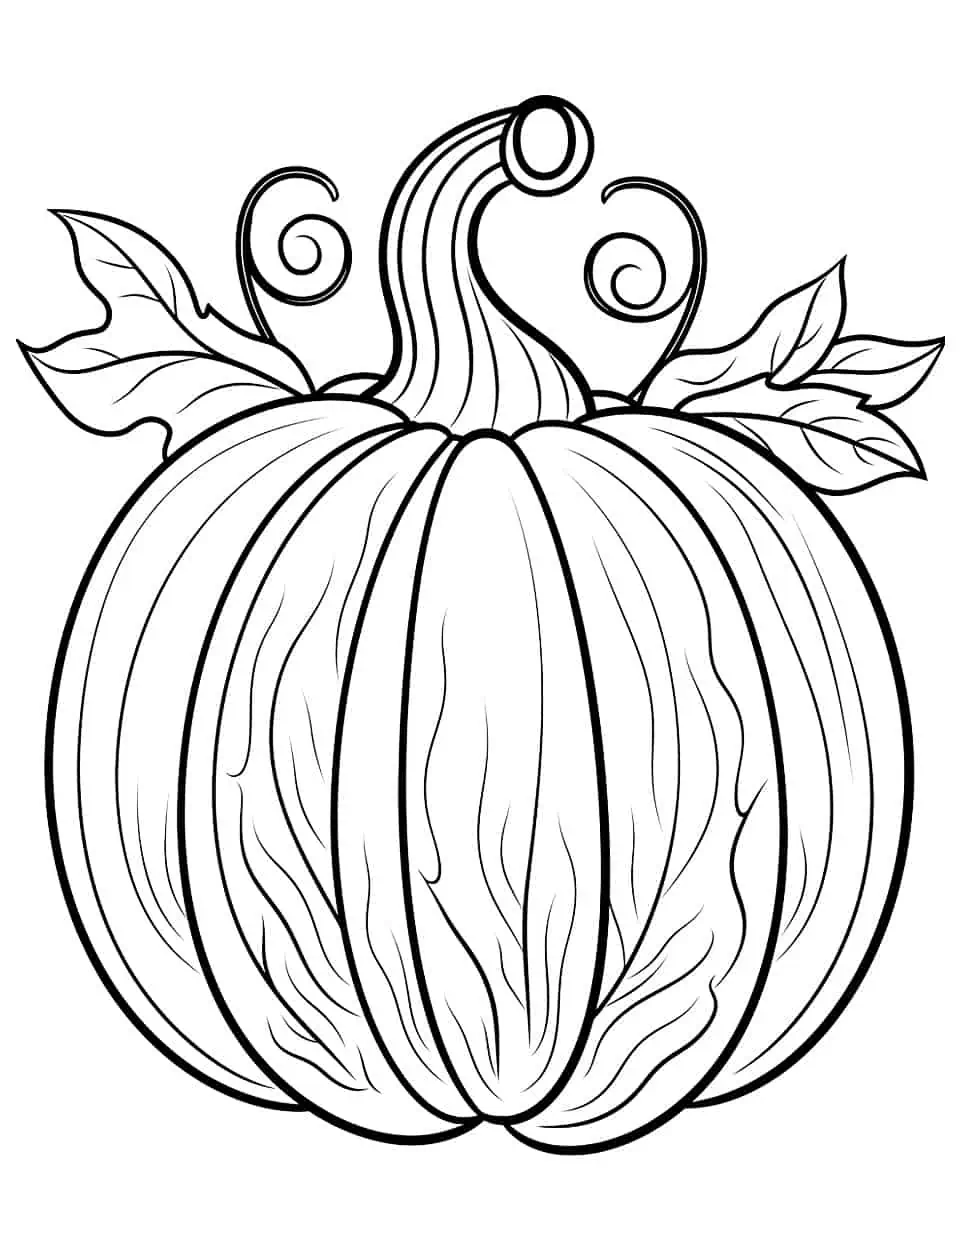 Intricate Pumpkin Design Coloring Page - An elaborately designed pumpkin for those who enjoy intricate coloring pages.